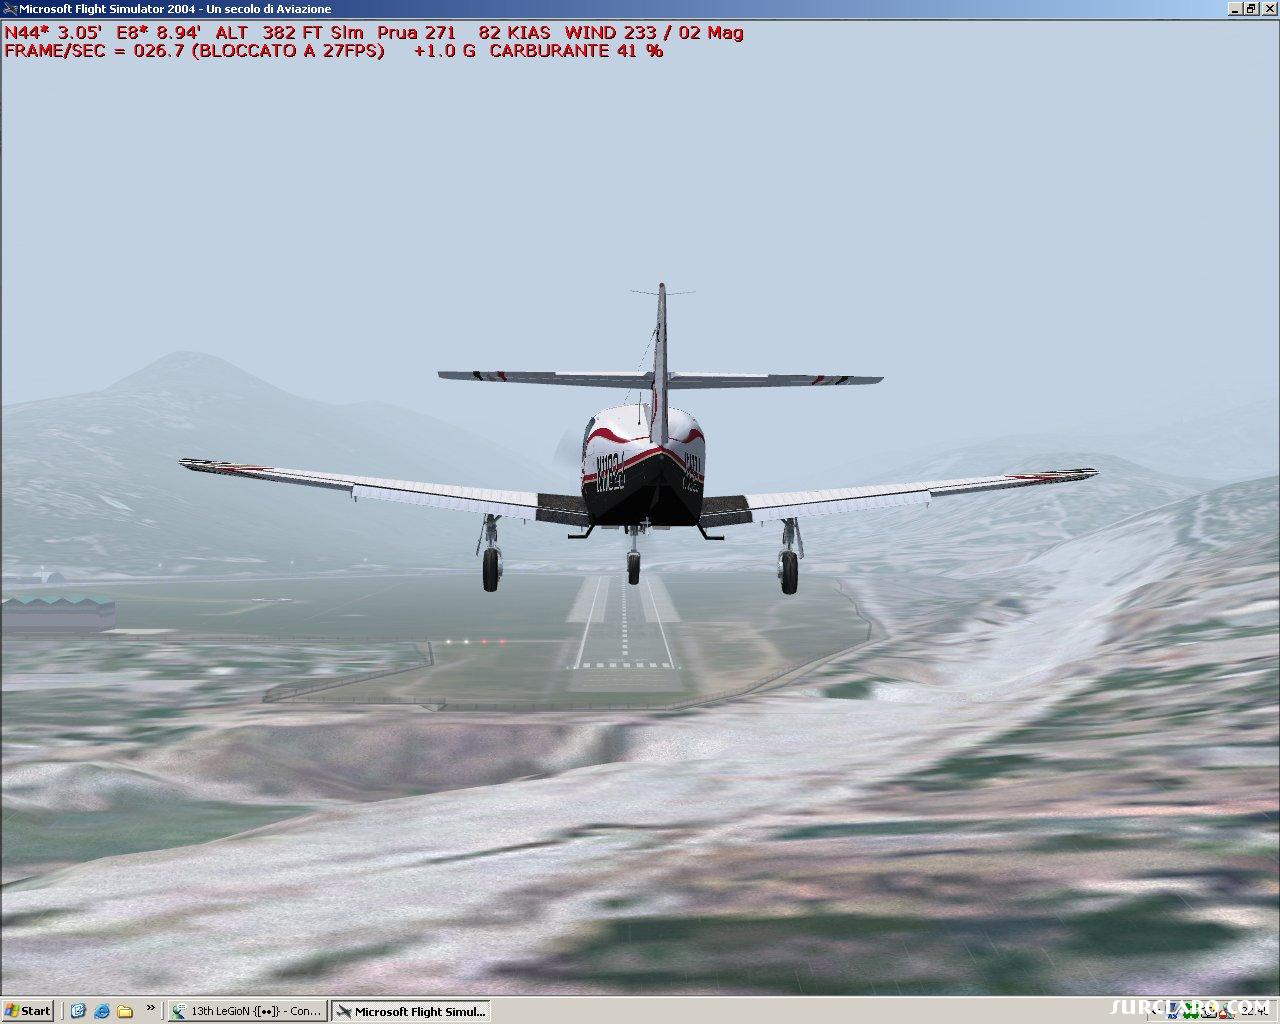 Rockwell Commander 112A on finals at Albegna LIMG - Photo 15459